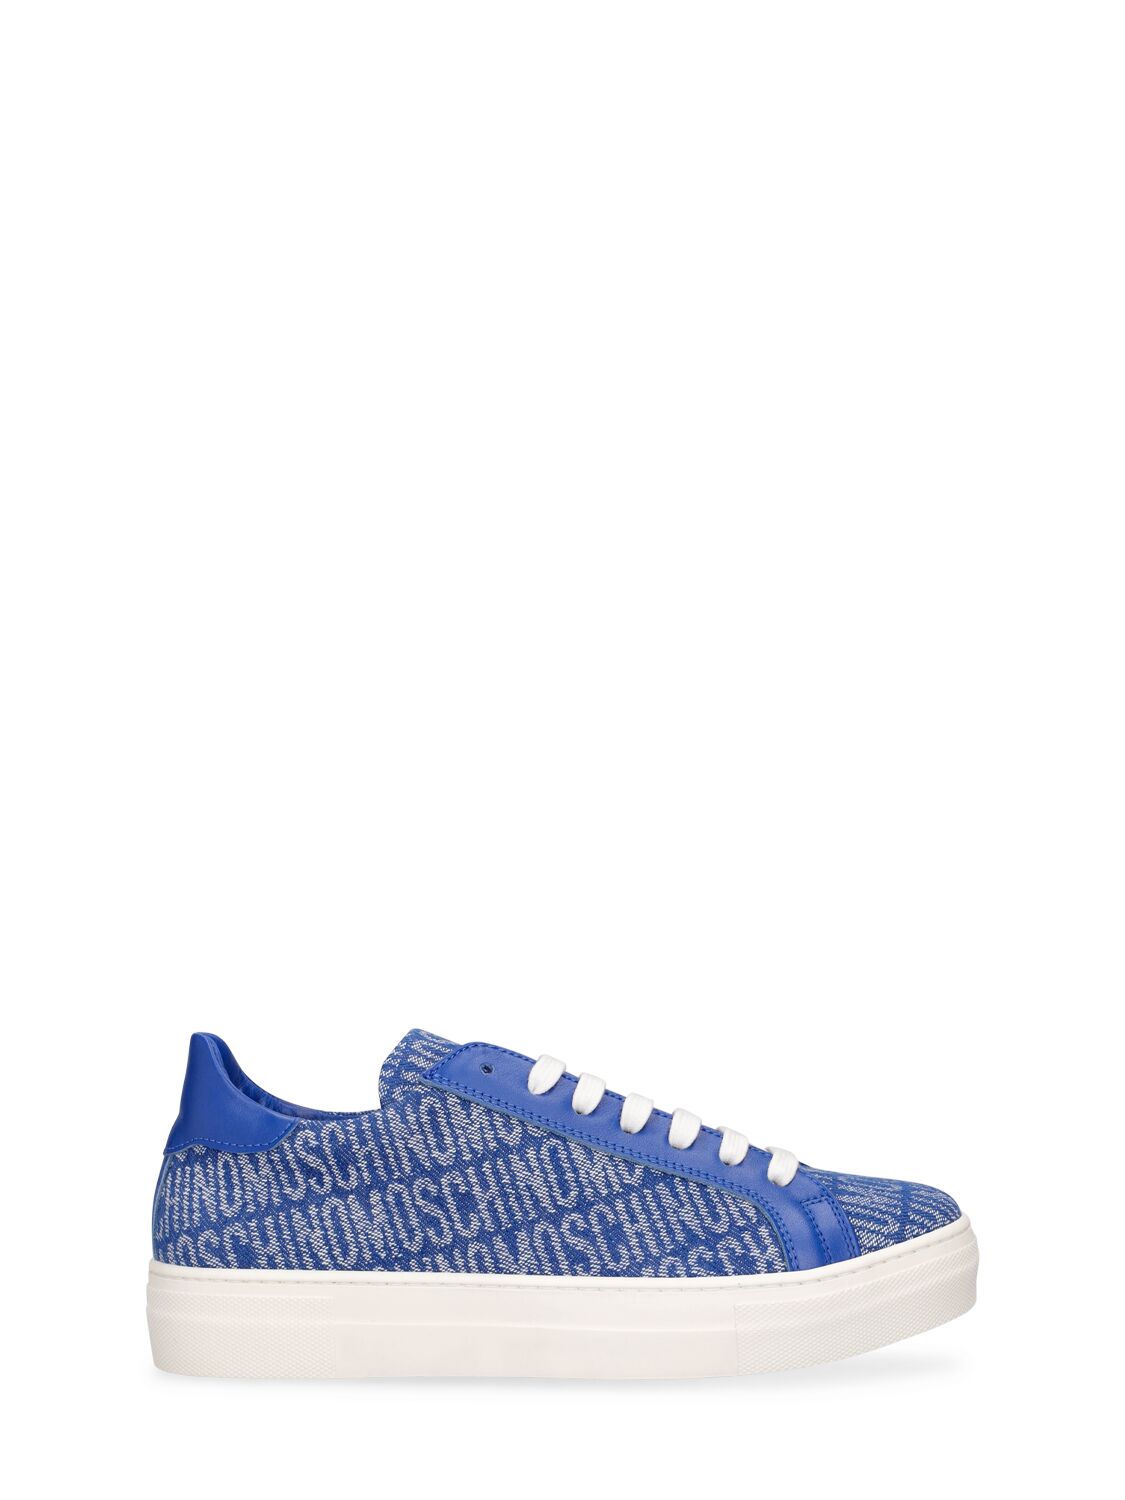 Moschino Kids' Leather & Denim Lace-up Sneakers